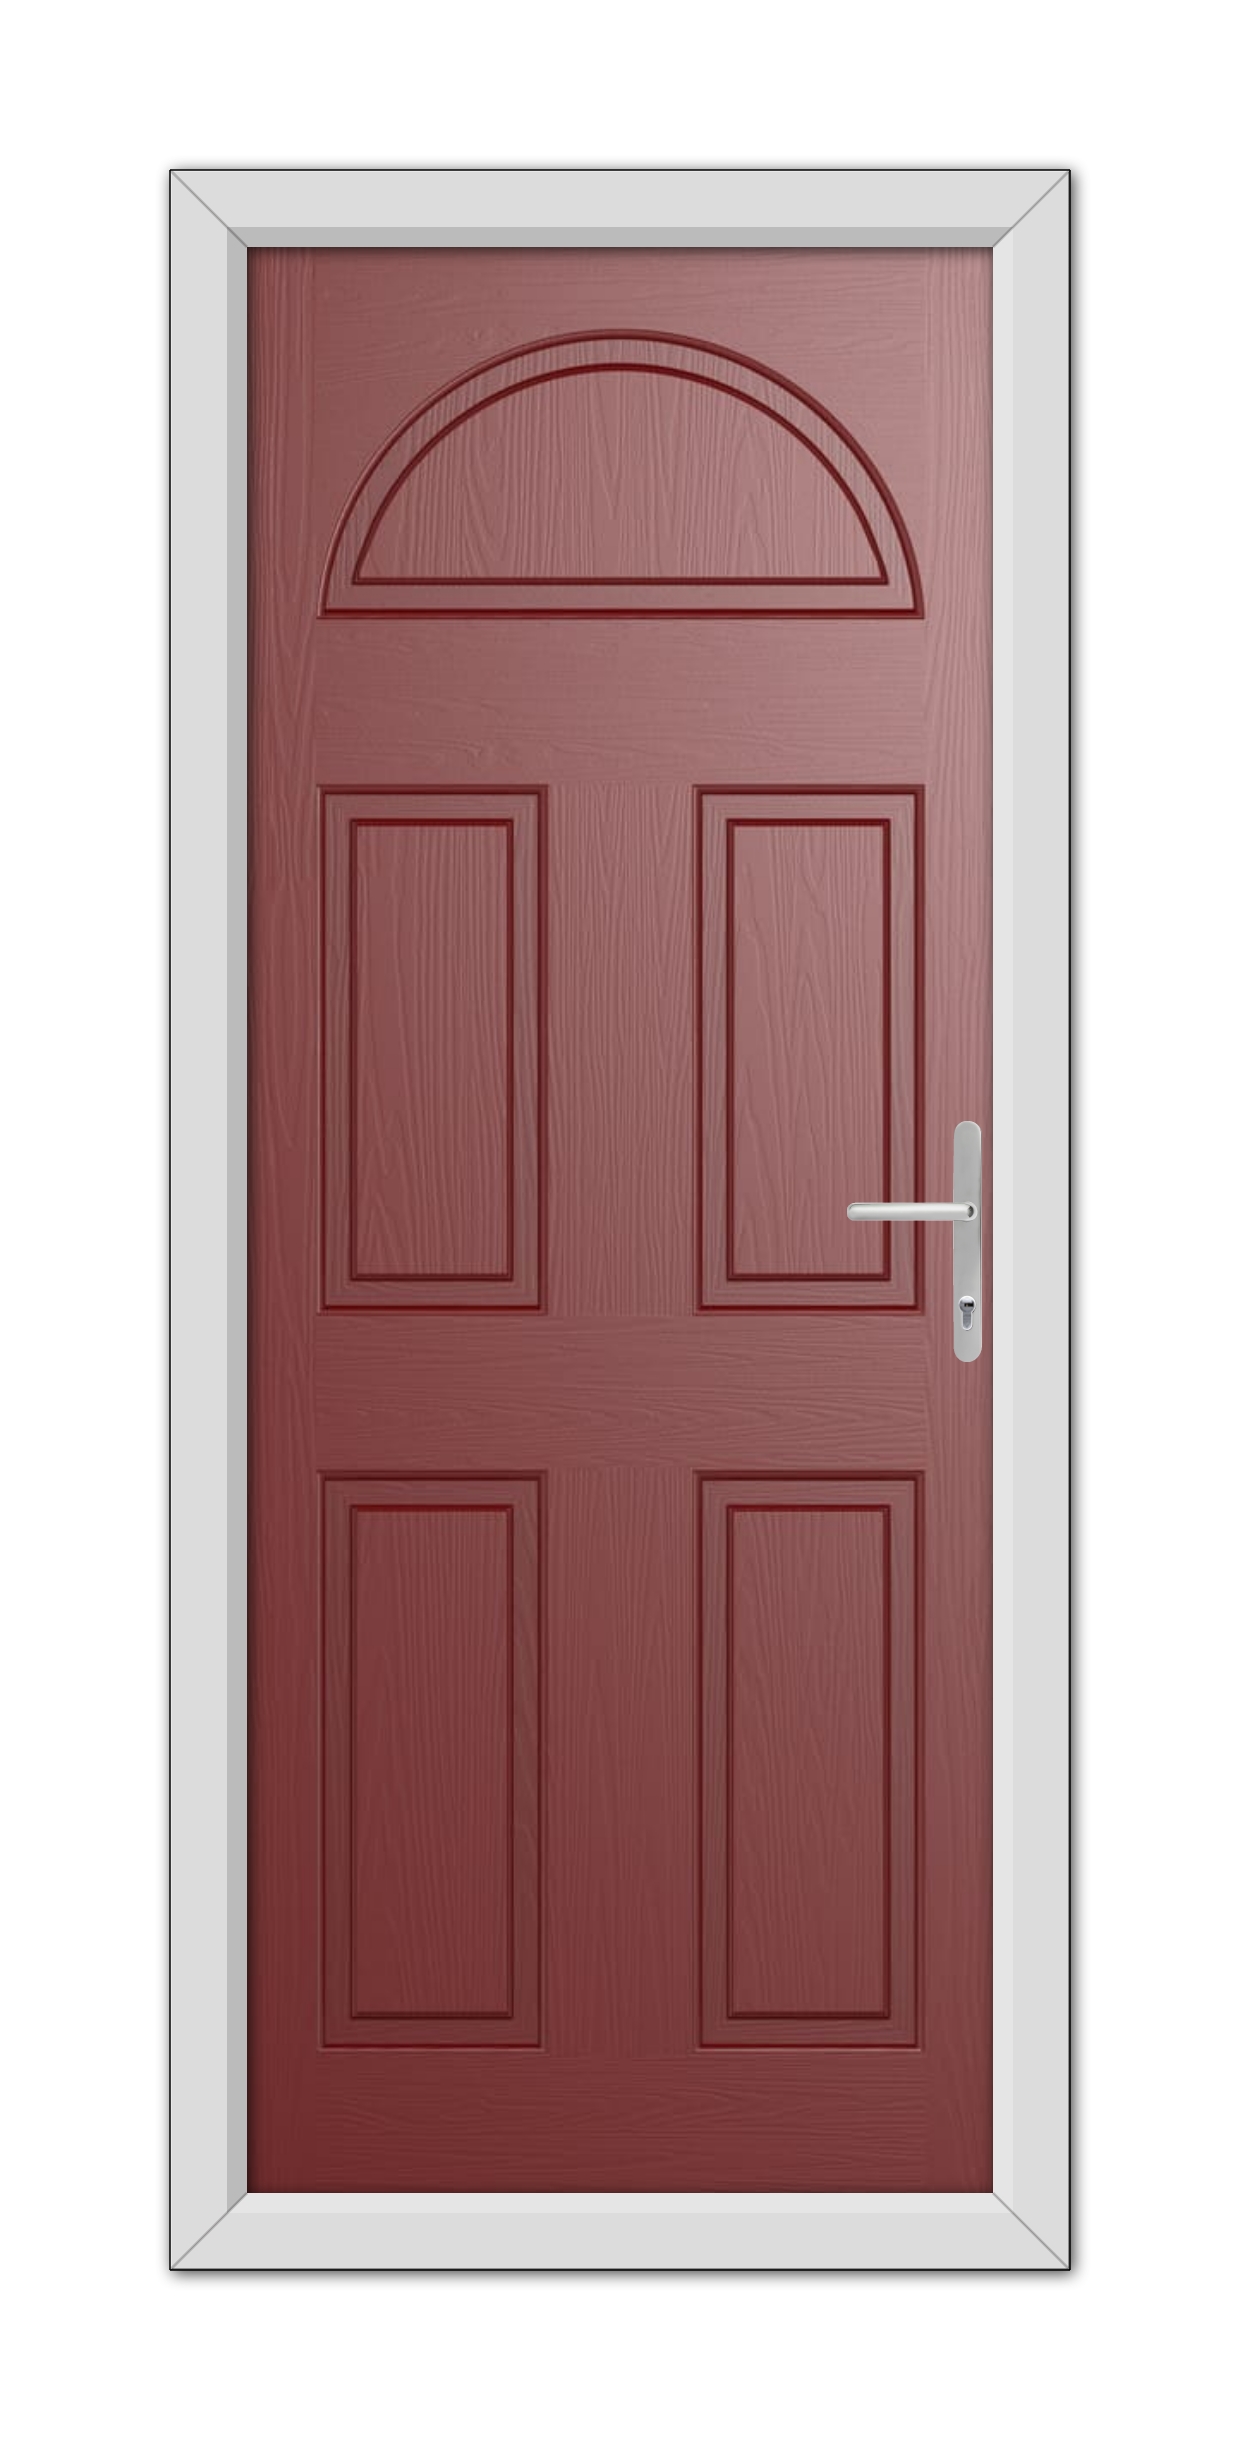 A Red Middleton Solid Stable Composite Door 48mm Timber Core with six panels and a silver handle, framed in a white door frame, isolated on a white background.